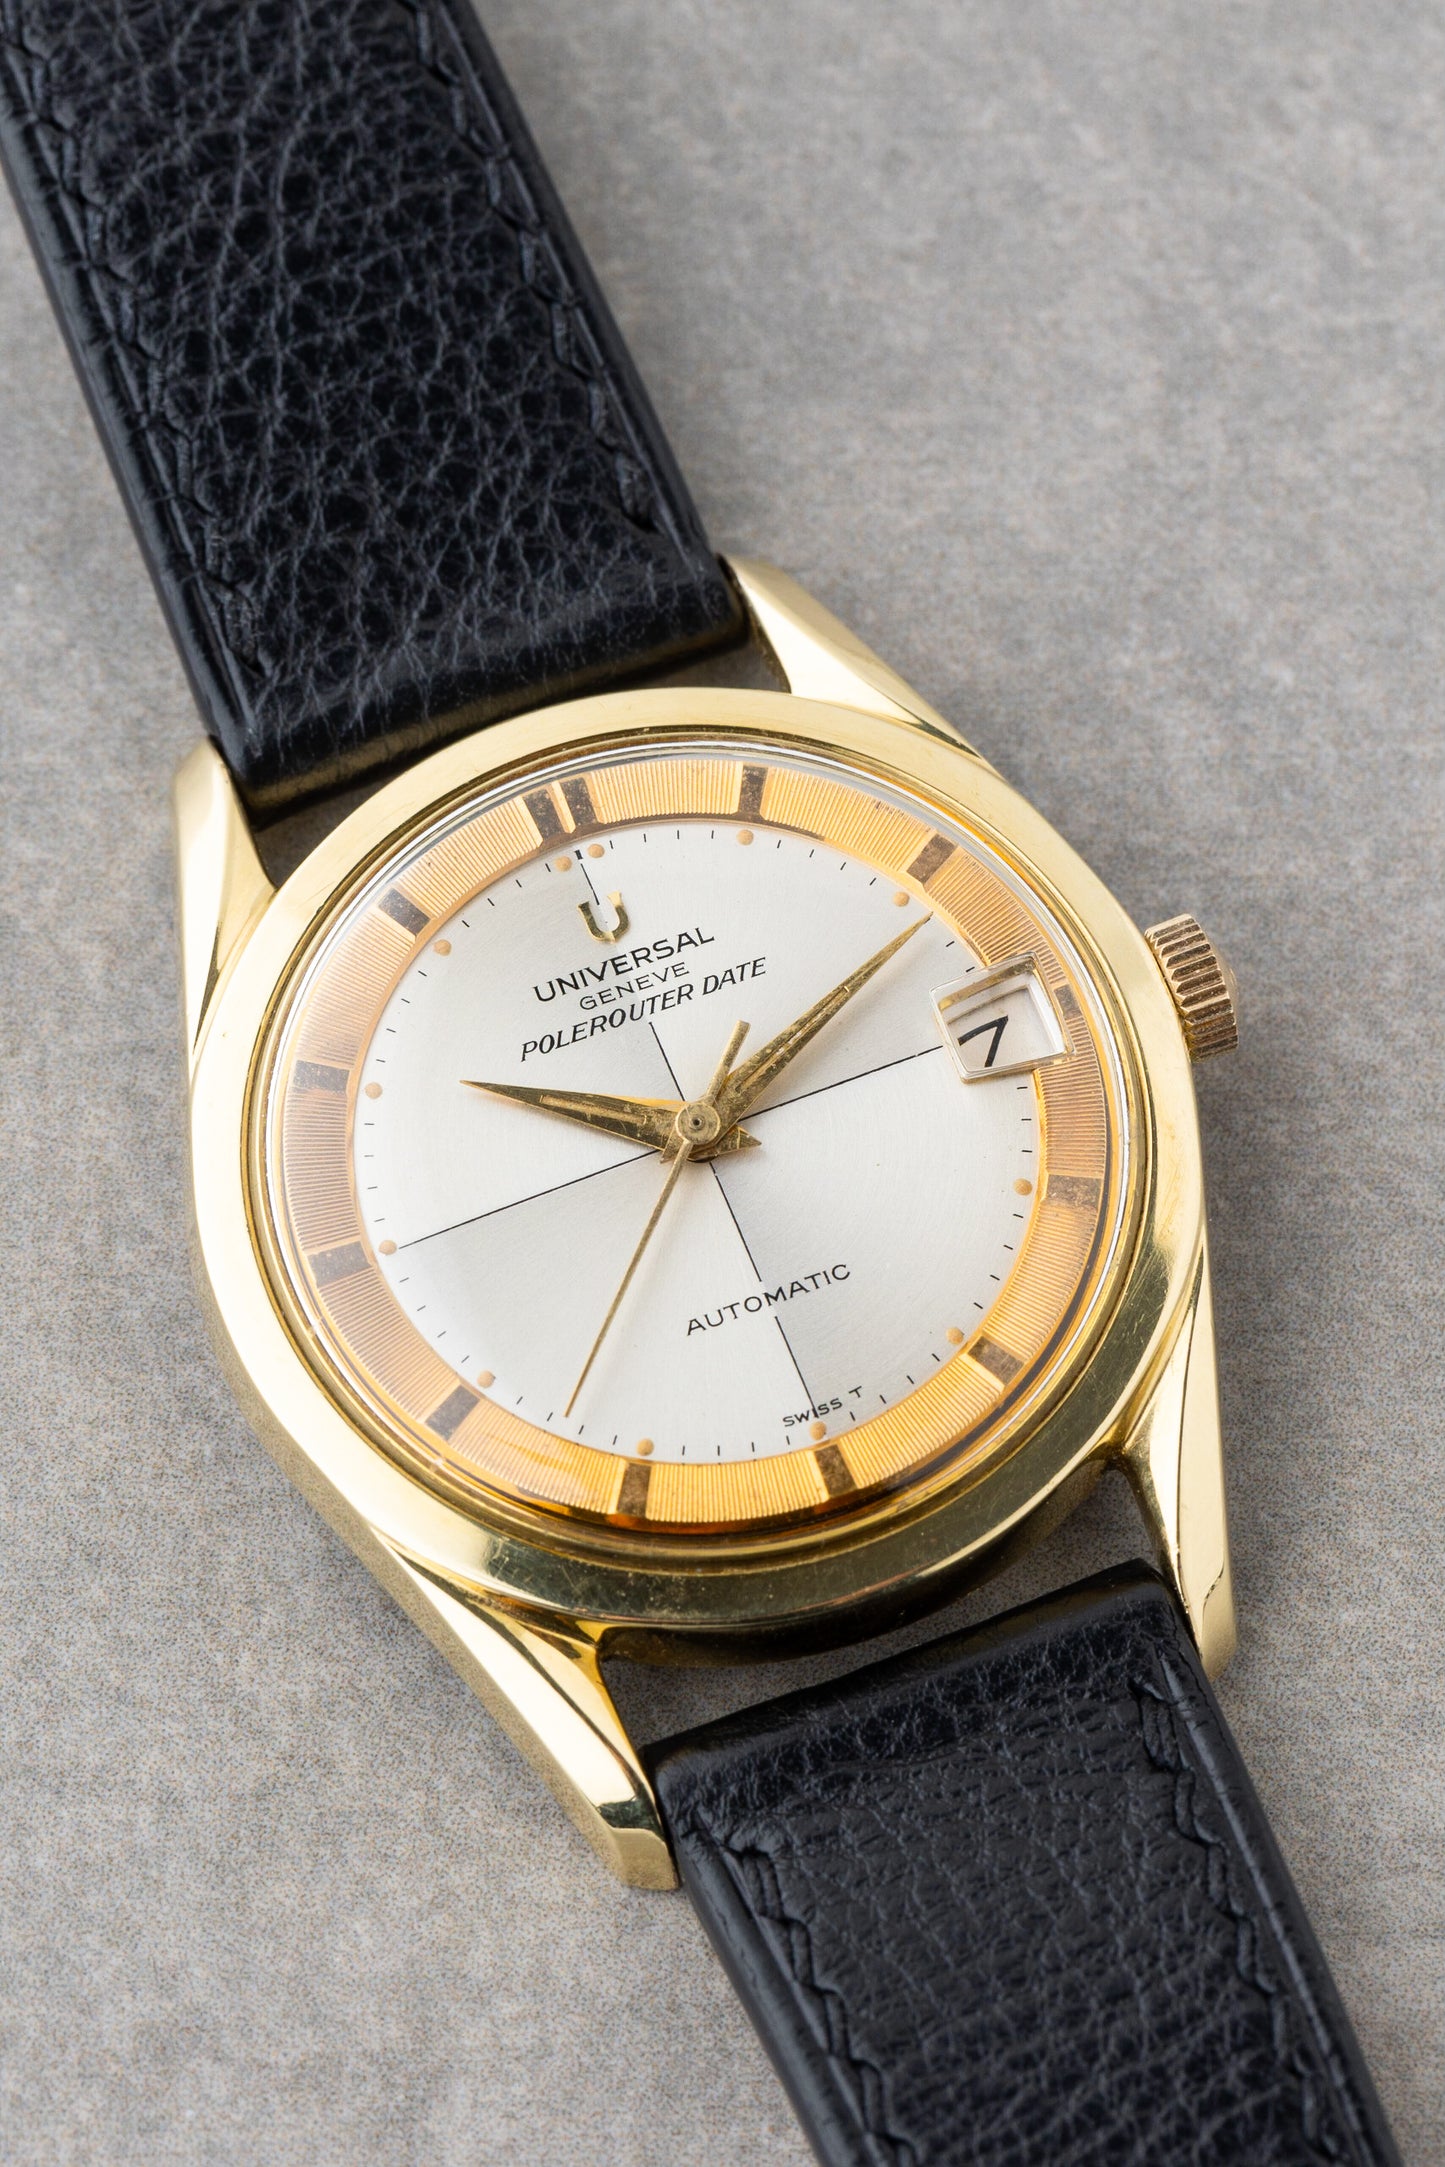 1965 Universal Genève Polerouter Date Automatic Microtor Ref. 869102/11